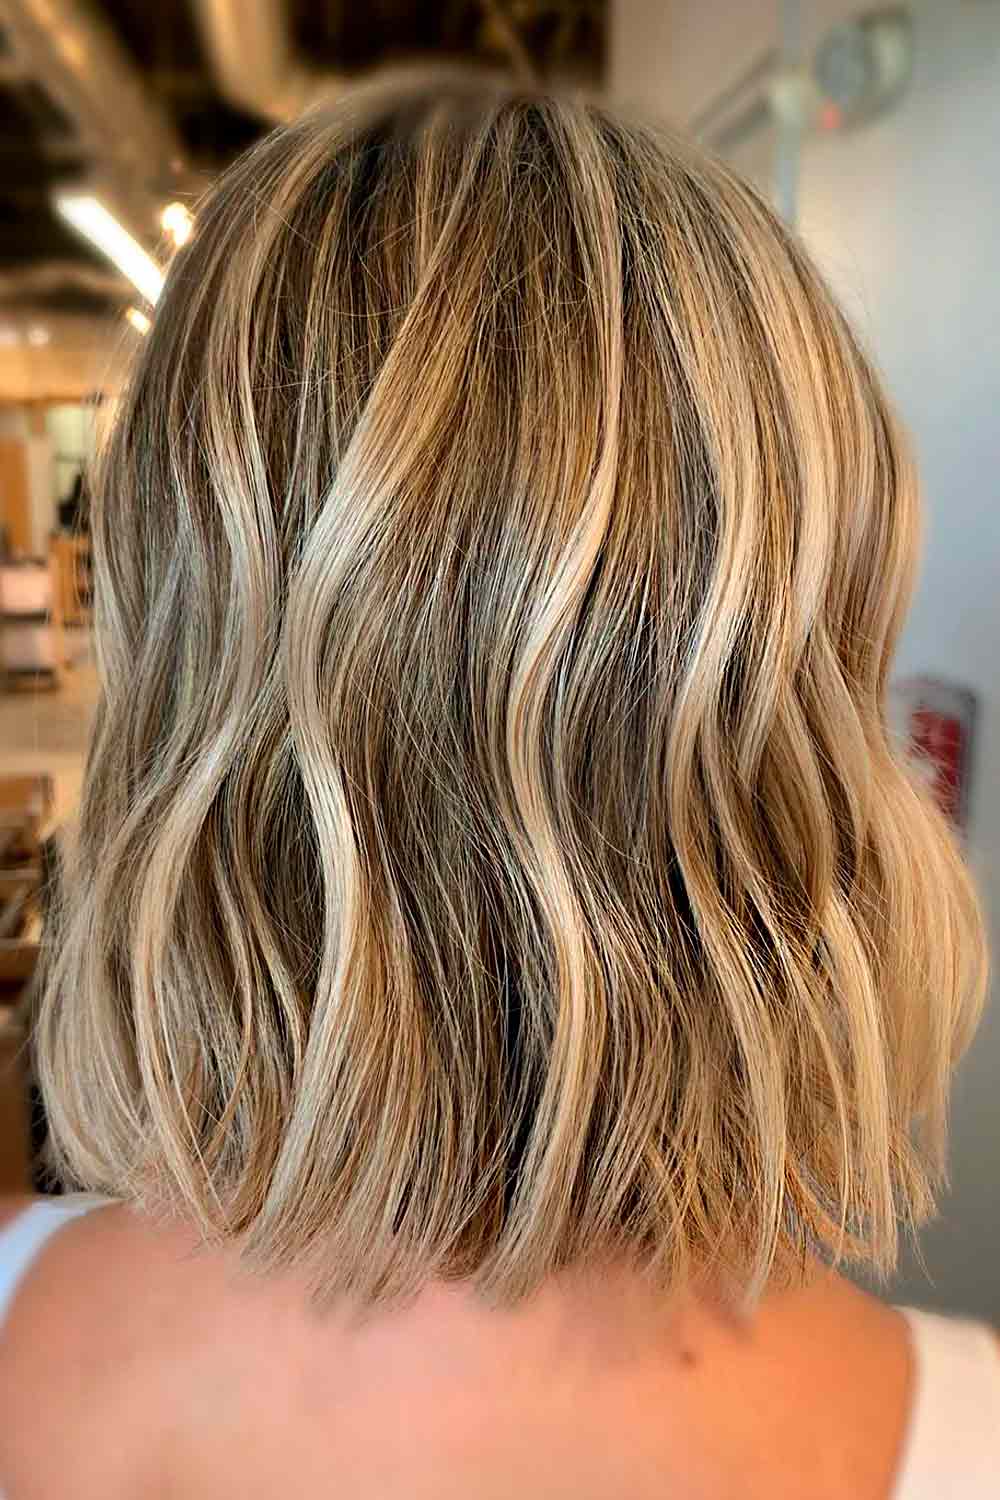 Dirty Blonde Haircut With Blonde Highlights #dirtyblondehair #dirtyblonde #blondehair #blonde